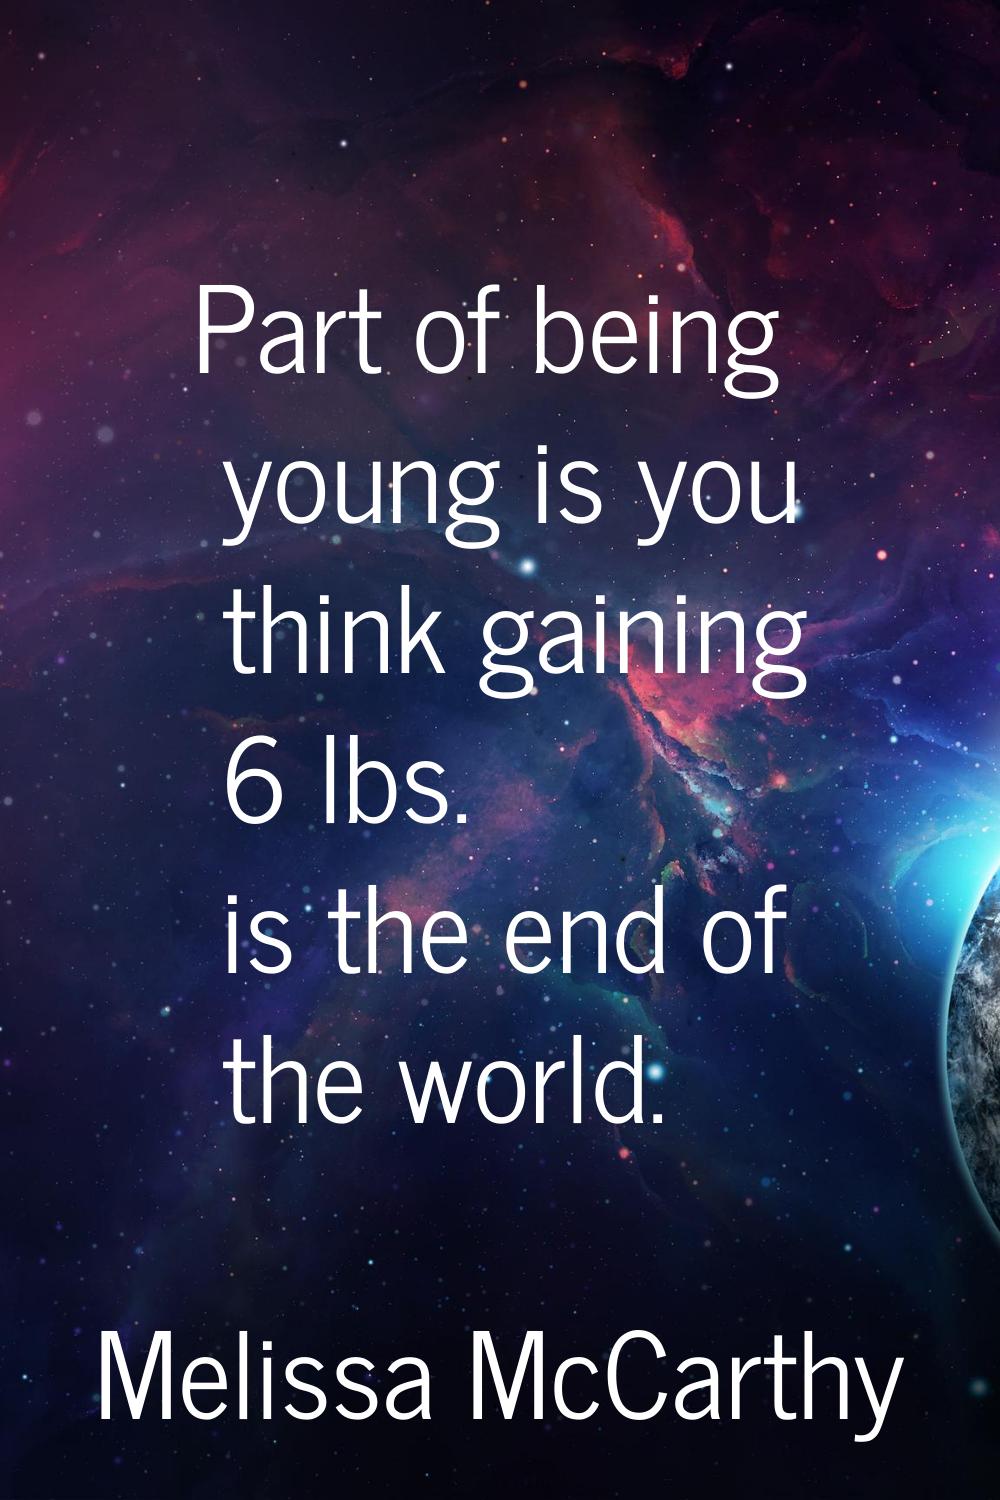 Part of being young is you think gaining 6 lbs. is the end of the world.